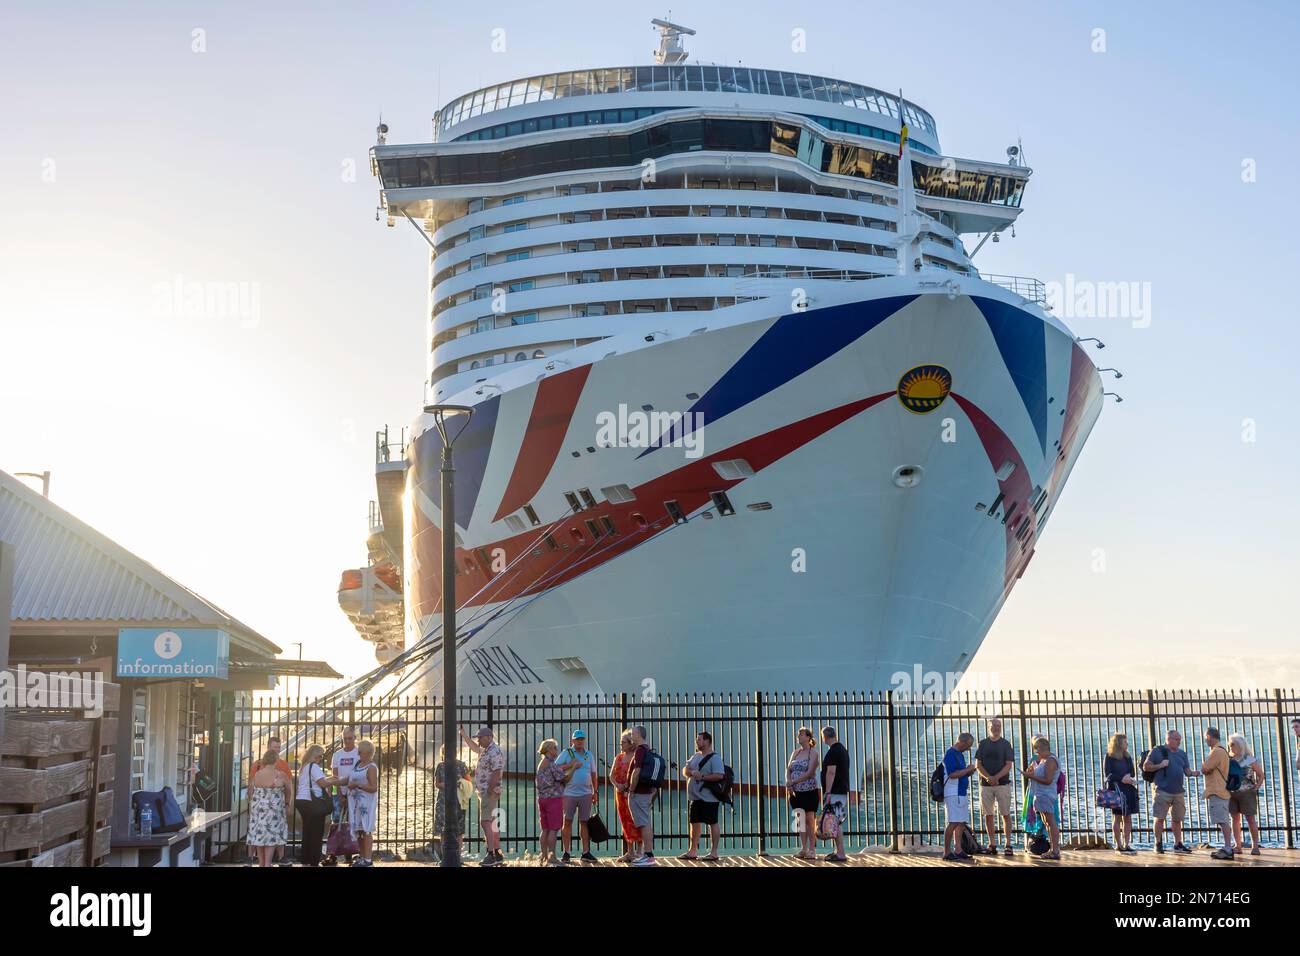 P&O Cruise ship Arvia docked in Road Town, Tortola with line of excursion passengers, The British Virgin Islands (BVI), Lesser Antilles, Caribbean Stock Photo